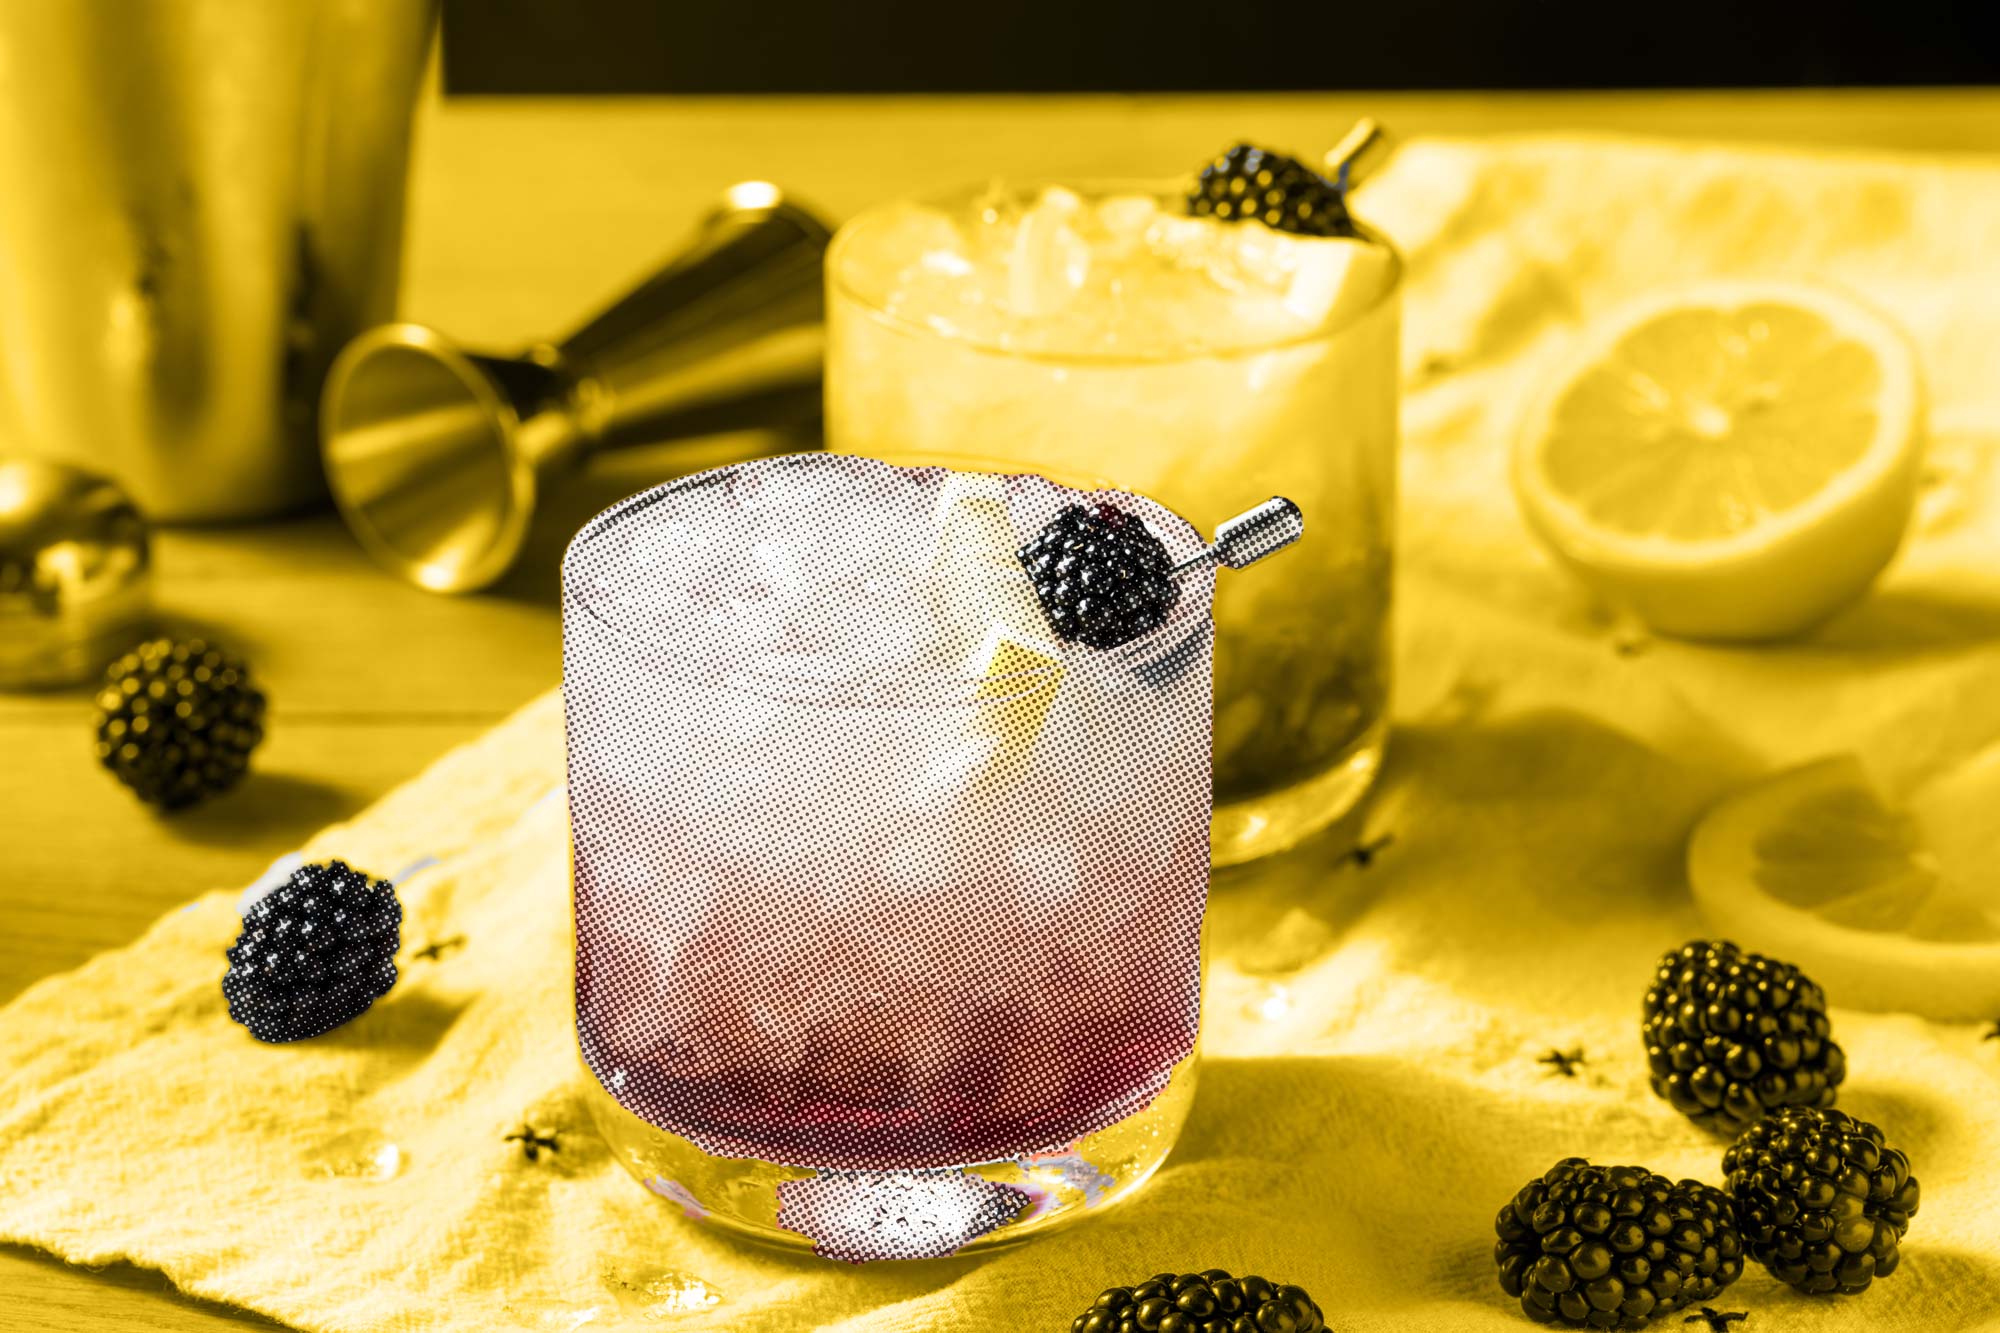 A Gin Sour with a blackberry twist: the Bramble Cocktail